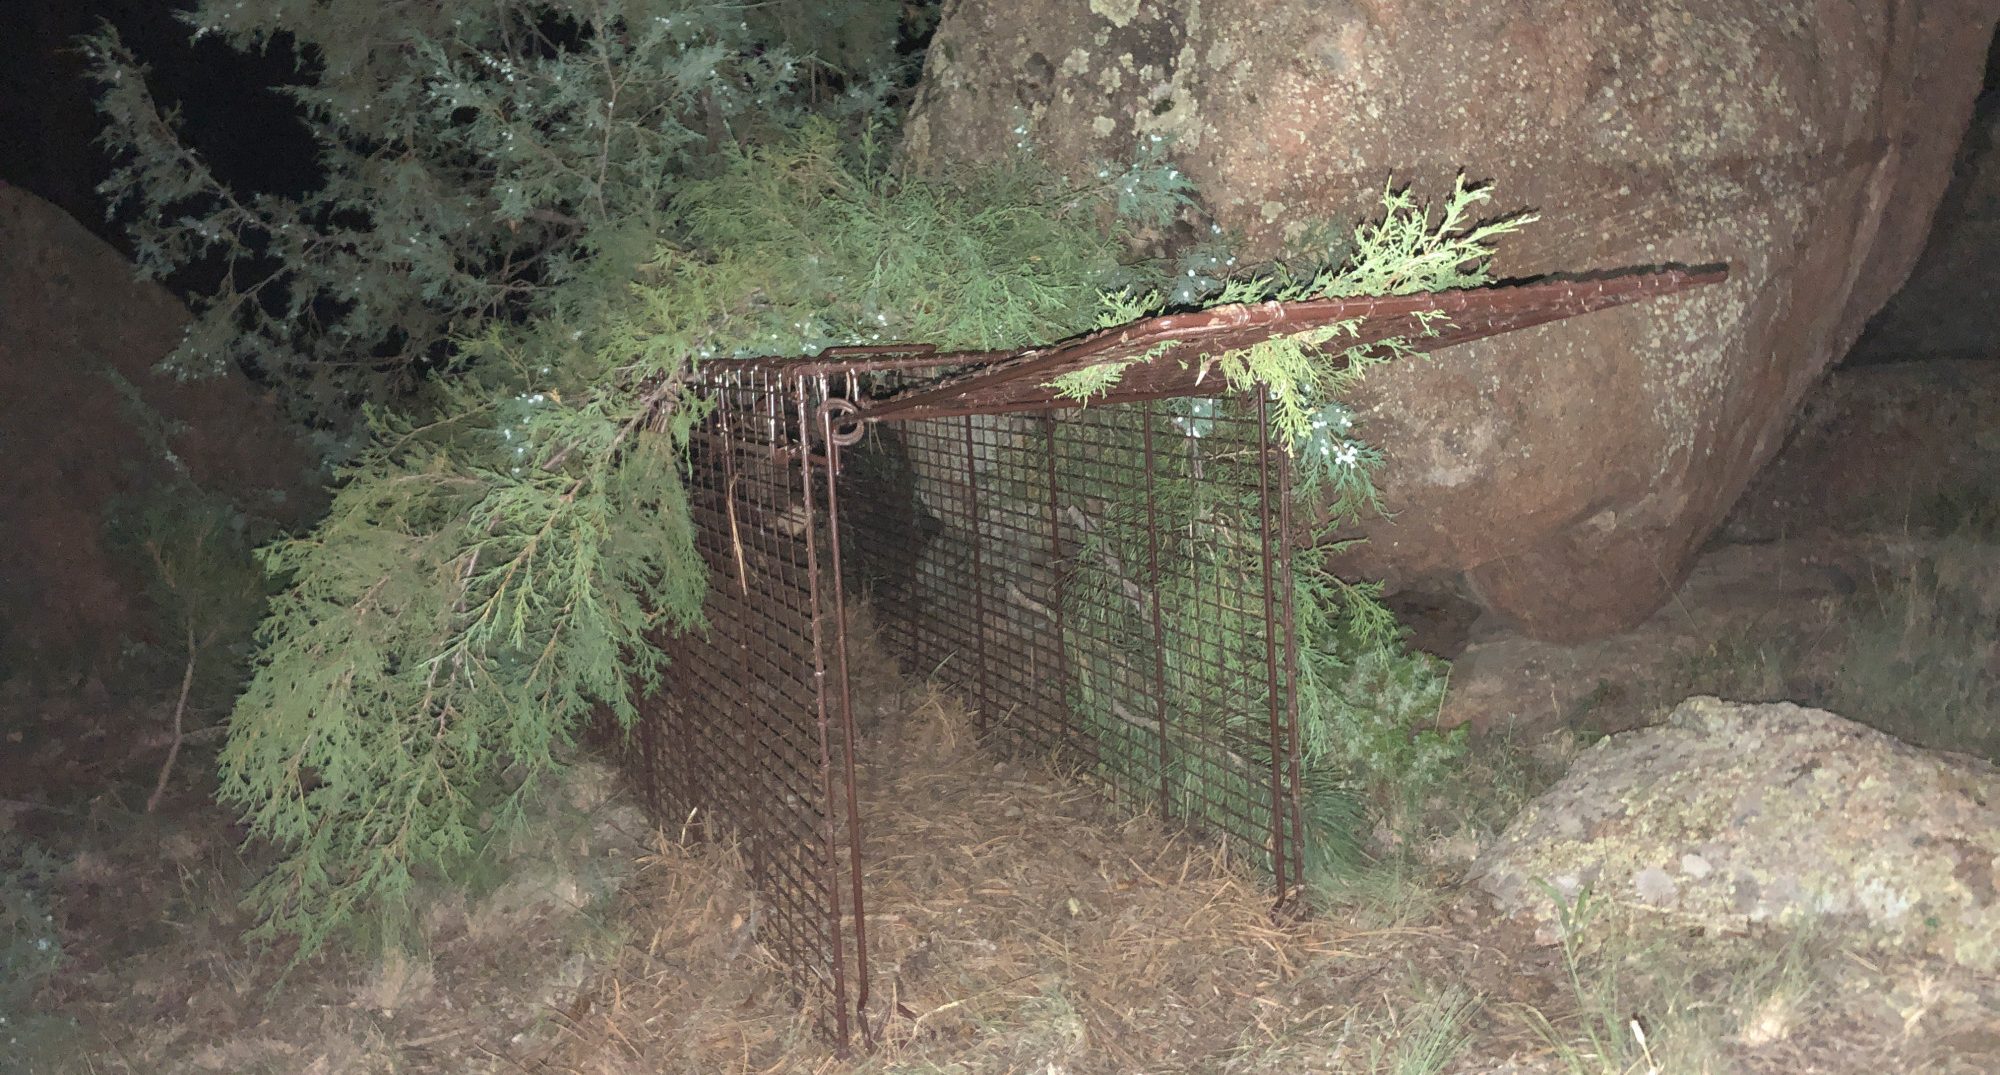 Wildlife officers set a trap